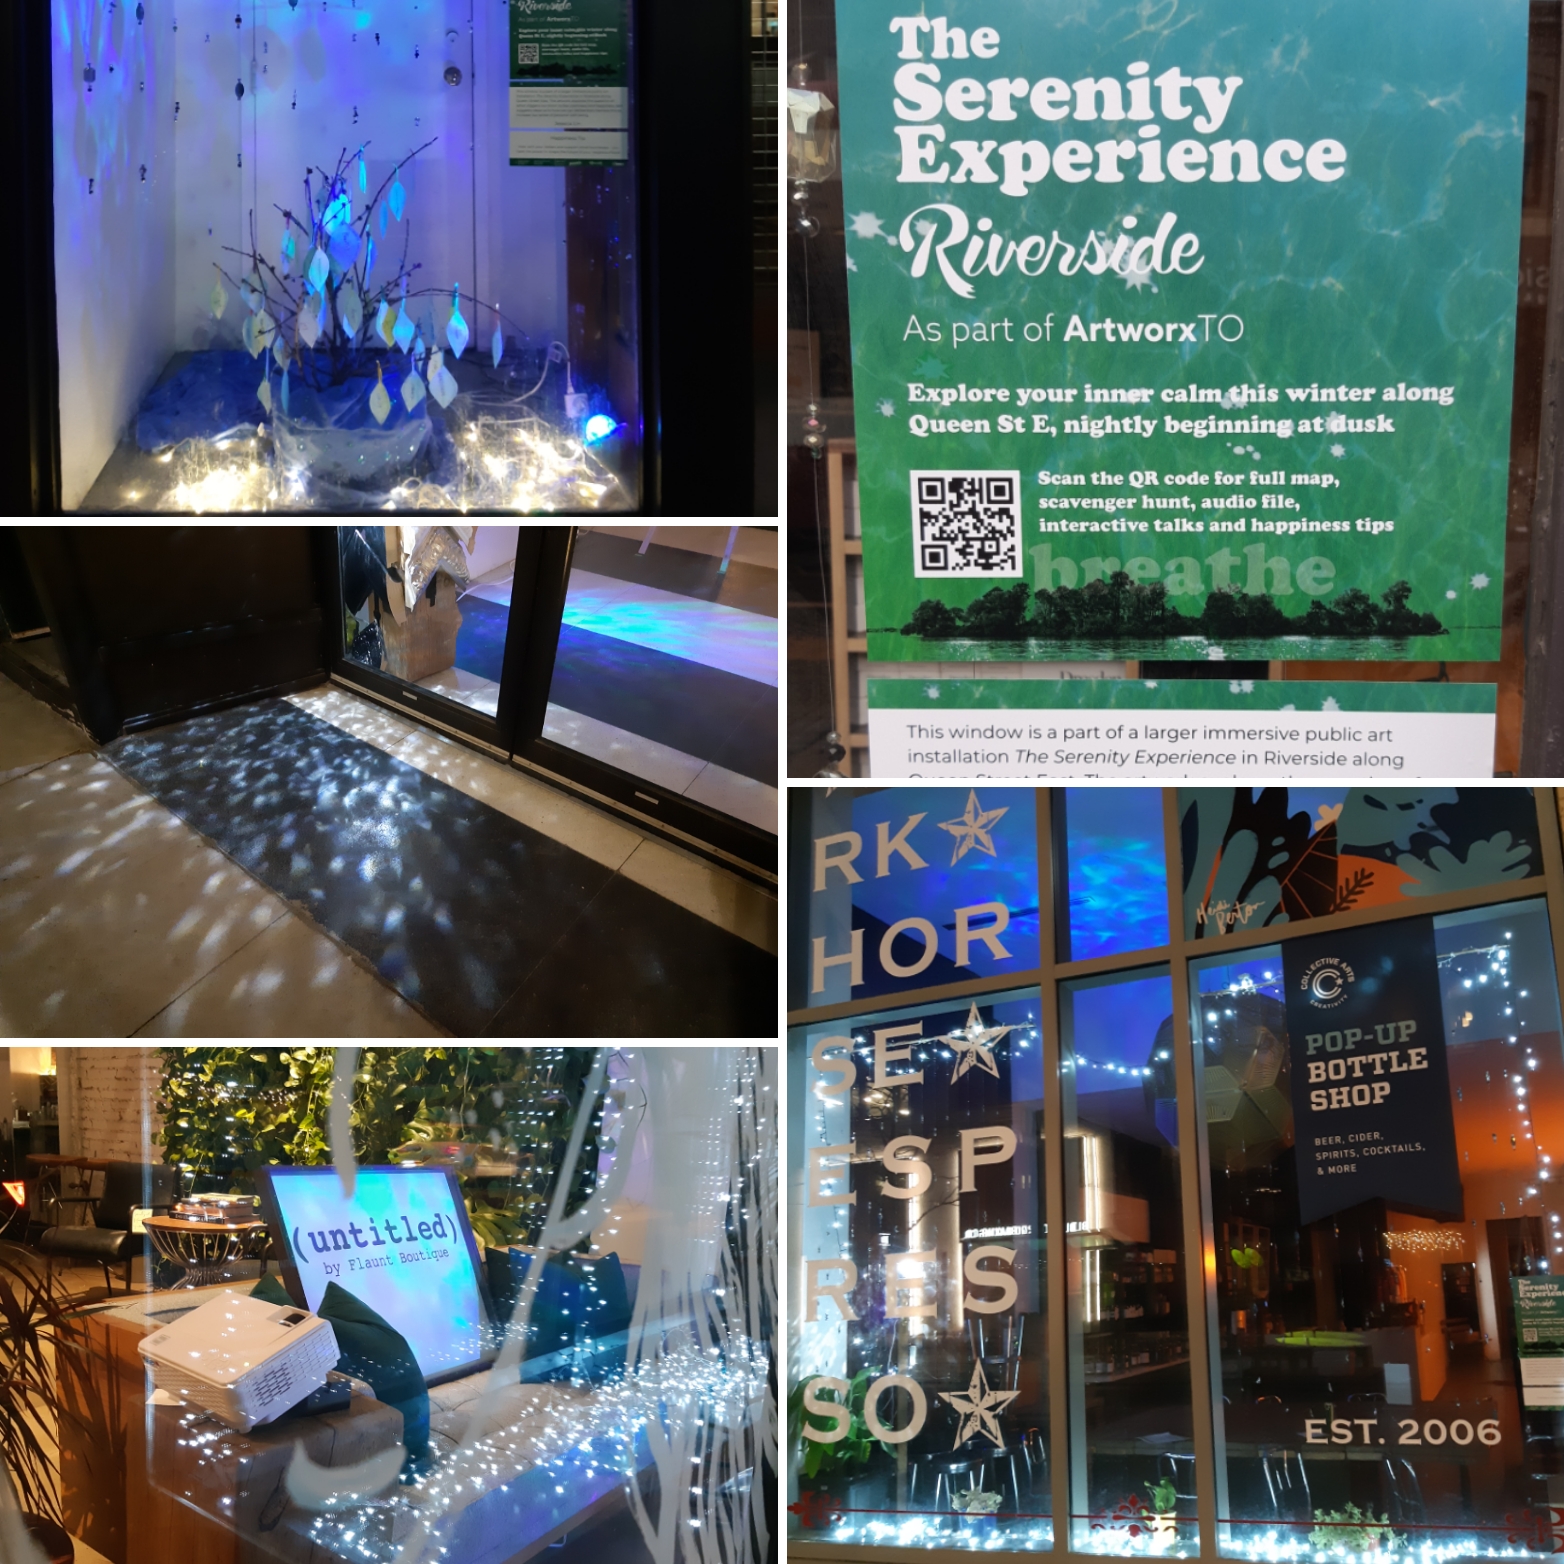 The Serenity Experience Riverside as part of ArtworxTO (collage of photos)